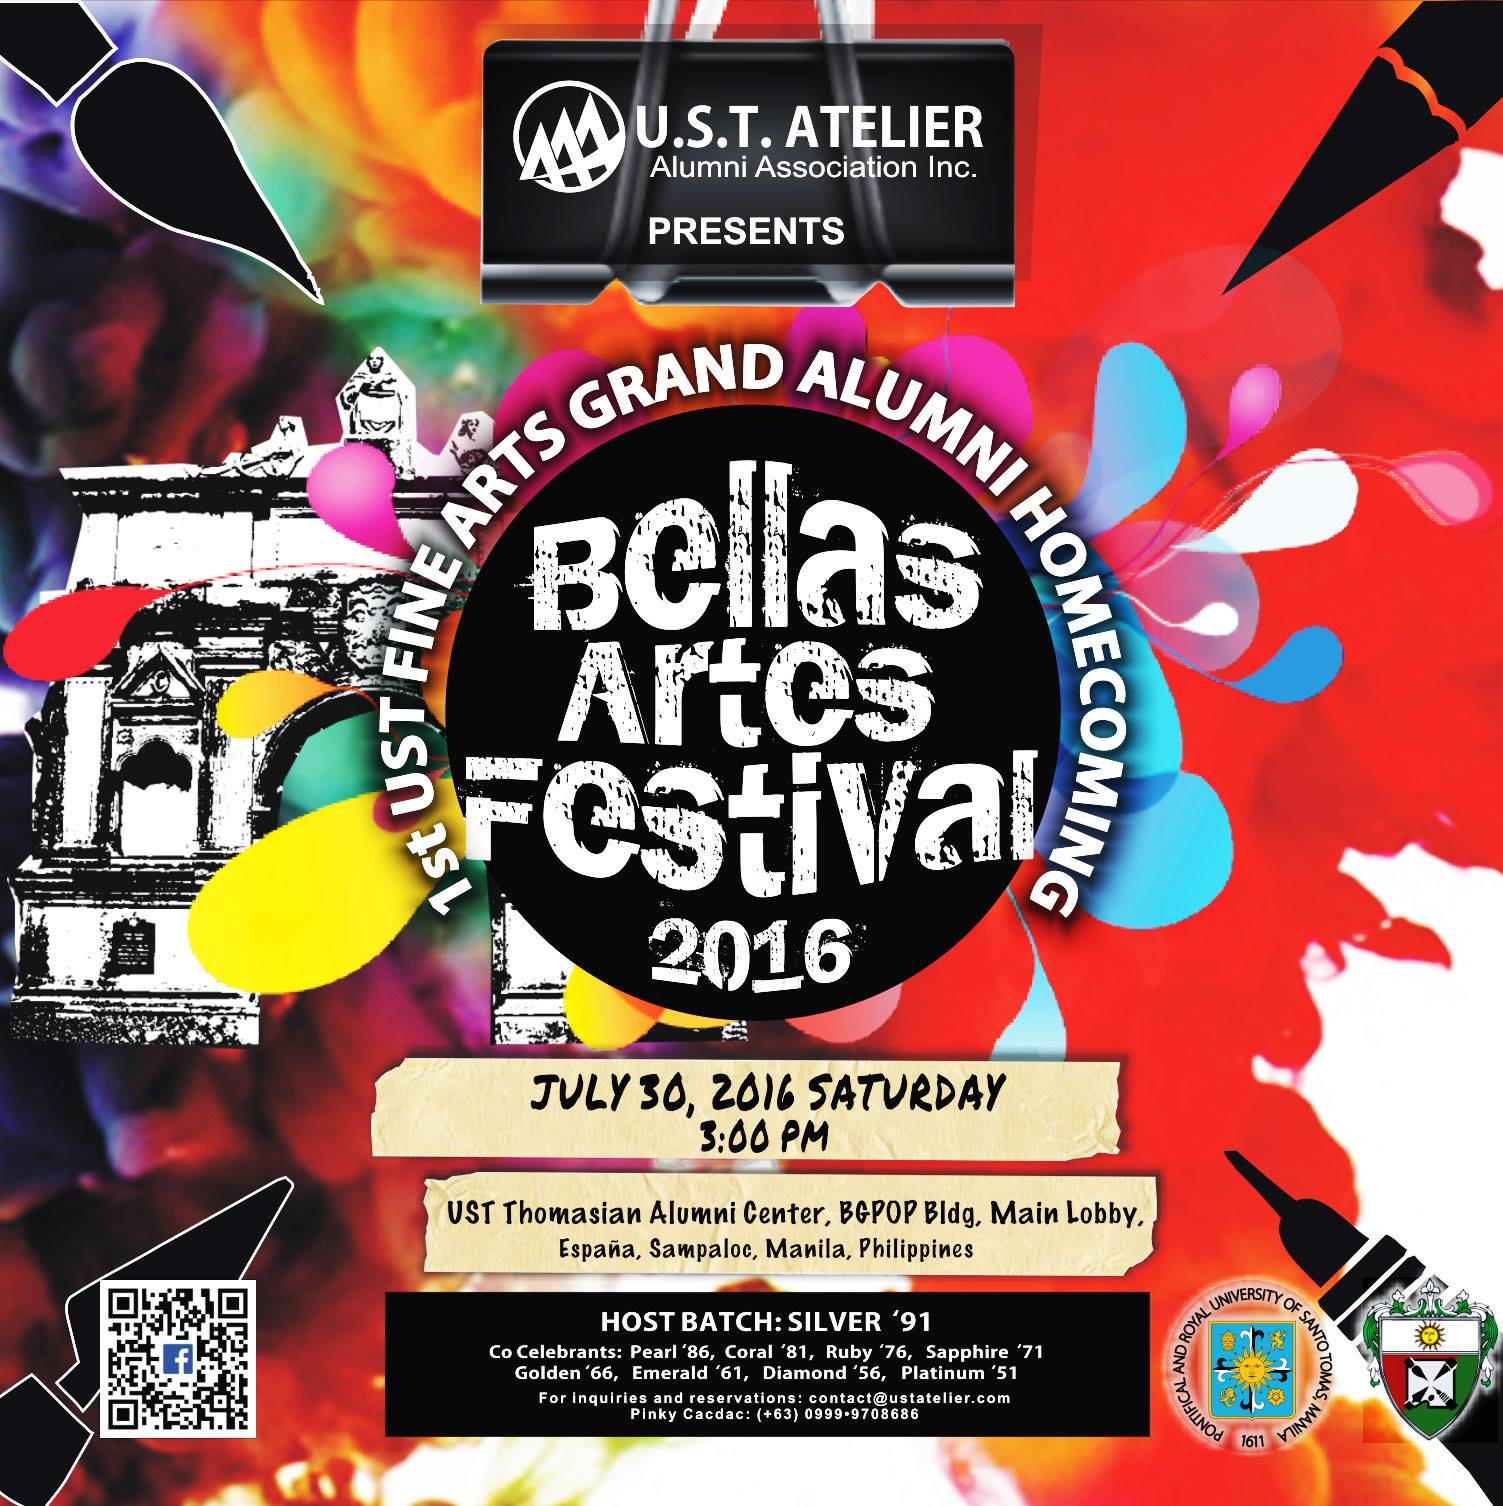 Bellas Artes Festival 2016 Hosted by UST Atelier Alumni Association clock Saturday, July 30 at 3 PM - 10 PM pin UST Thomasian Alumni Center, BGPOP Bldg, Main Lobby, UST España, Manila ticket Find Tickets Tickets Available ustatelier.com About Discussion Write Post Add Photo / Video Create Poll Details 1st UST Fine Arts Grand Alumni Homecoming Time: 3pm - 10pm Fees: 1) Alumni: P1,500/person (Dinner/Alumni Fee & Raffle) 2) Guest of Alumni : P500 (Dinner) For inquiries text or visit: Pinky Cacdac: 0999-9708686 Rhea Adonis: 0998-4227203 www.ustatelier.com https://www.facebook.com/groups/ustaaa/ ---- Bellas Artes Festival 2016 clock Saturday, July 30 at 3 PM - 8 PM pin Alumni Building, University of Santo Tomas, Espana, Manila ticket Find Tickets Tickets Available ustatelier.com About Discussion Write Post Add Photo / Video Create Poll Write something... Details 1st UST Fine Arts Grand Alumni Homecoming For more info, visit: www.ustatelier.com